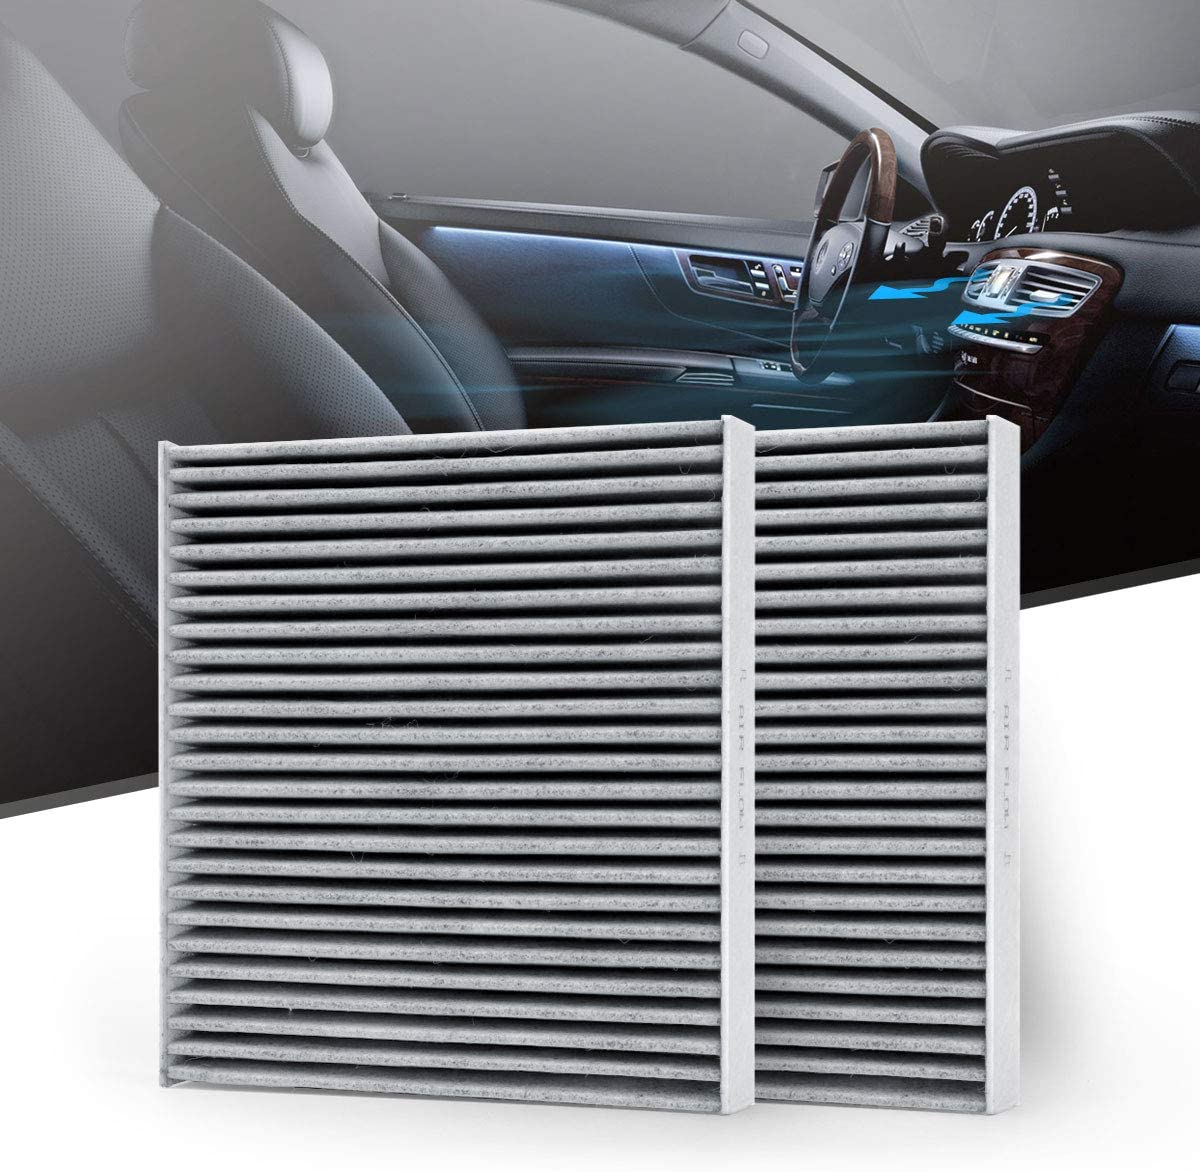 KAFEEK Cabin Air Filter Fits CF10140, 27277-4M400, 999M1-VP051, 7803A109, Replacement for Infiniti/Mitsubishi, includes Activated Carbon (2-Pack)